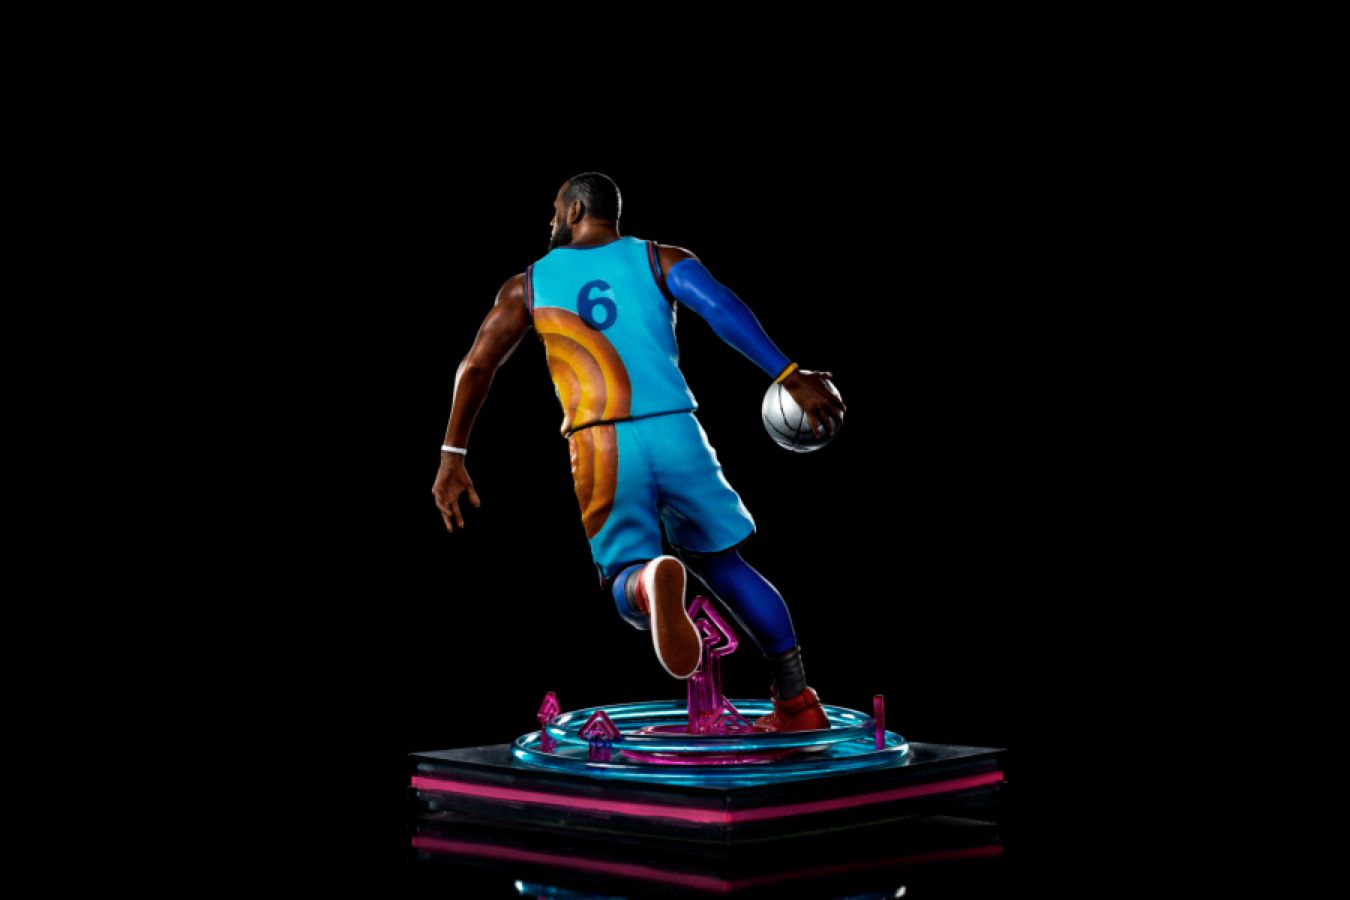 Space Jam 2: A New Legacy - Lebron James 1:10 Scale Statue